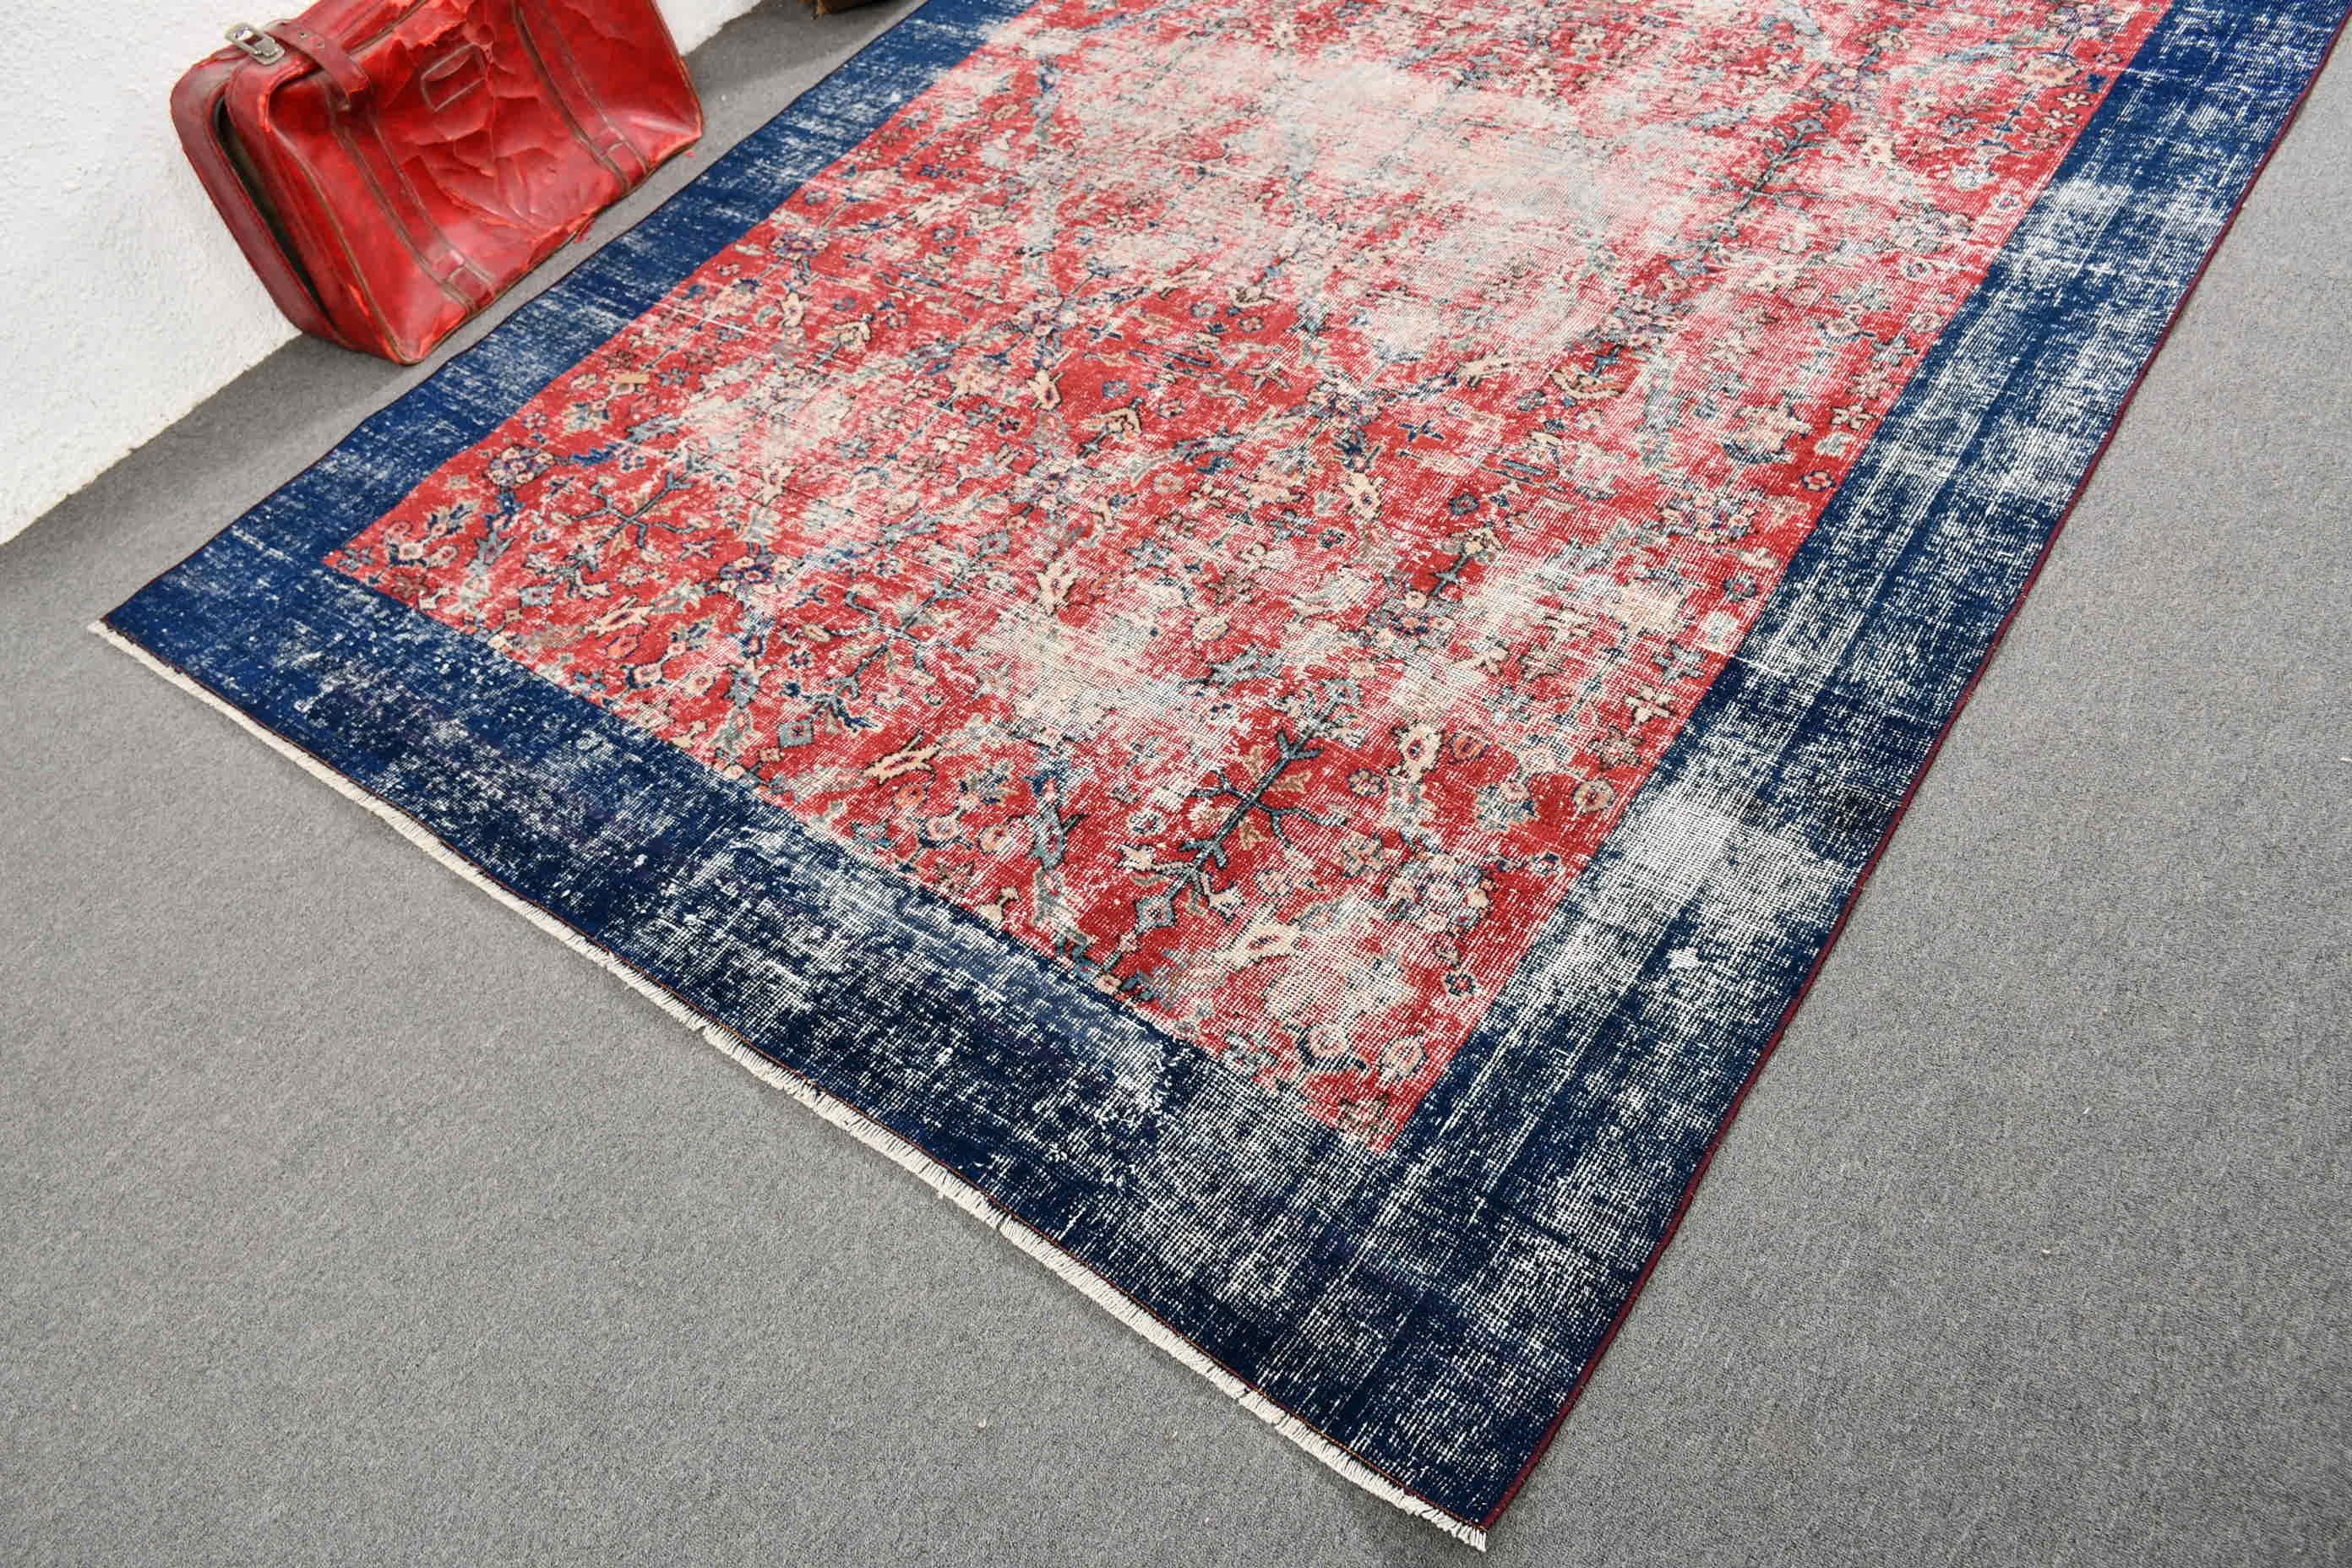 Eclectic Rugs, Turkish Rug, Dining Room Rugs, Red Moroccan Rug, 6.3x9.1 ft Large Rug, Kitchen Rug, Vintage Rugs, Cool Rugs, Bedroom Rugs